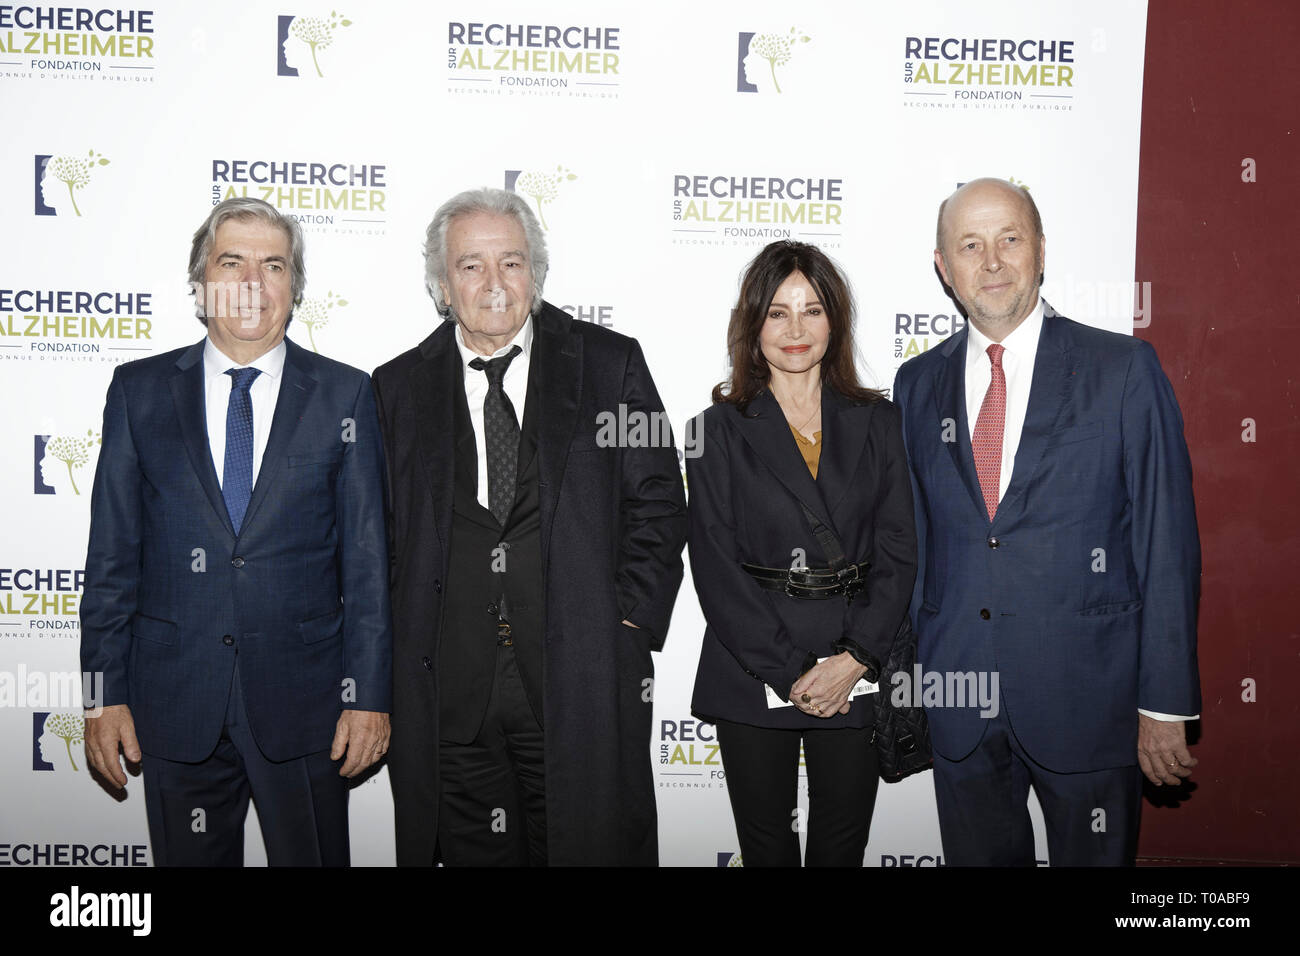 Paris, France. 18th Mar 2019. Pr Bruno Dubois (L), Pierre Arditi, Evelyne Bouix and Olivier De Ladoucette (R) - Photocall of the 14th Gala 2019 of the Association for Alzheimer Research at the Olympia in Paris on March 18, 2019. Credit: Véronique PHITOUSSI/Alamy Live News Stock Photo